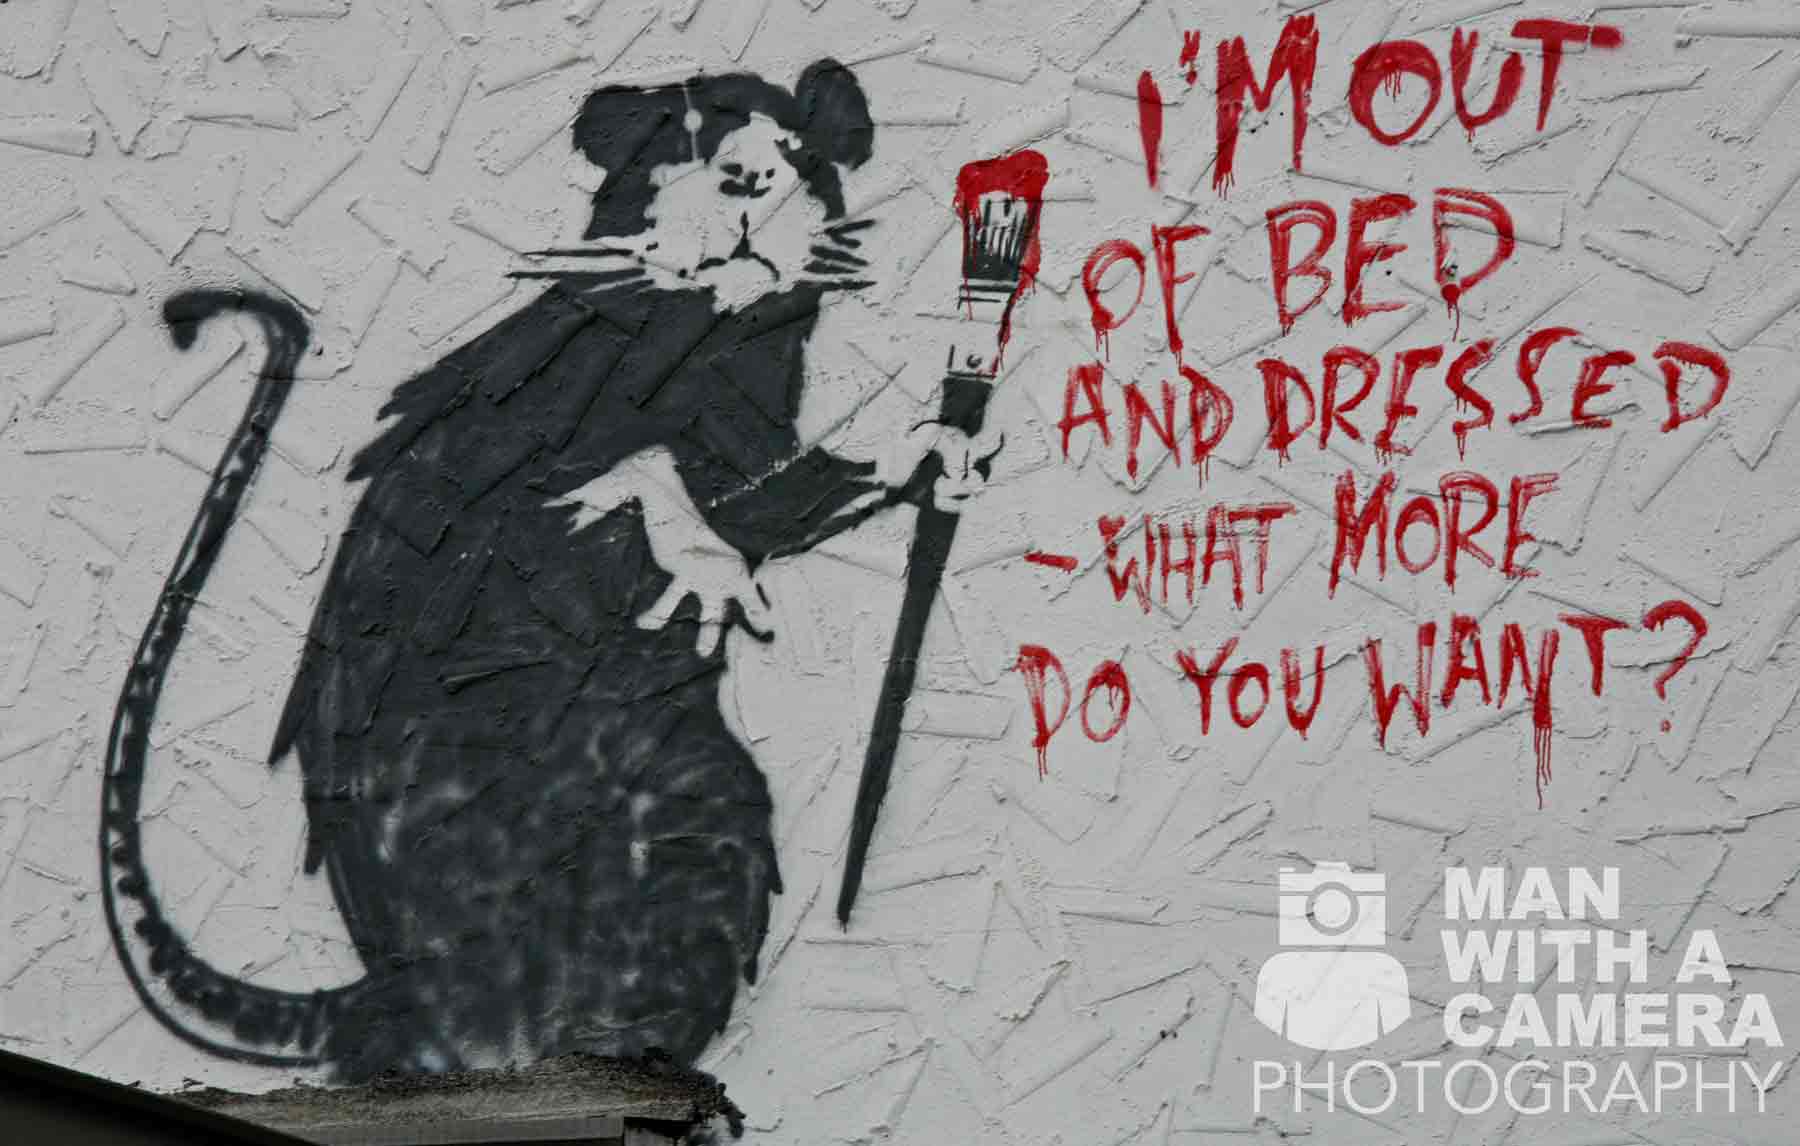 banksy-LA-rat-out-of-bed-and-dressed